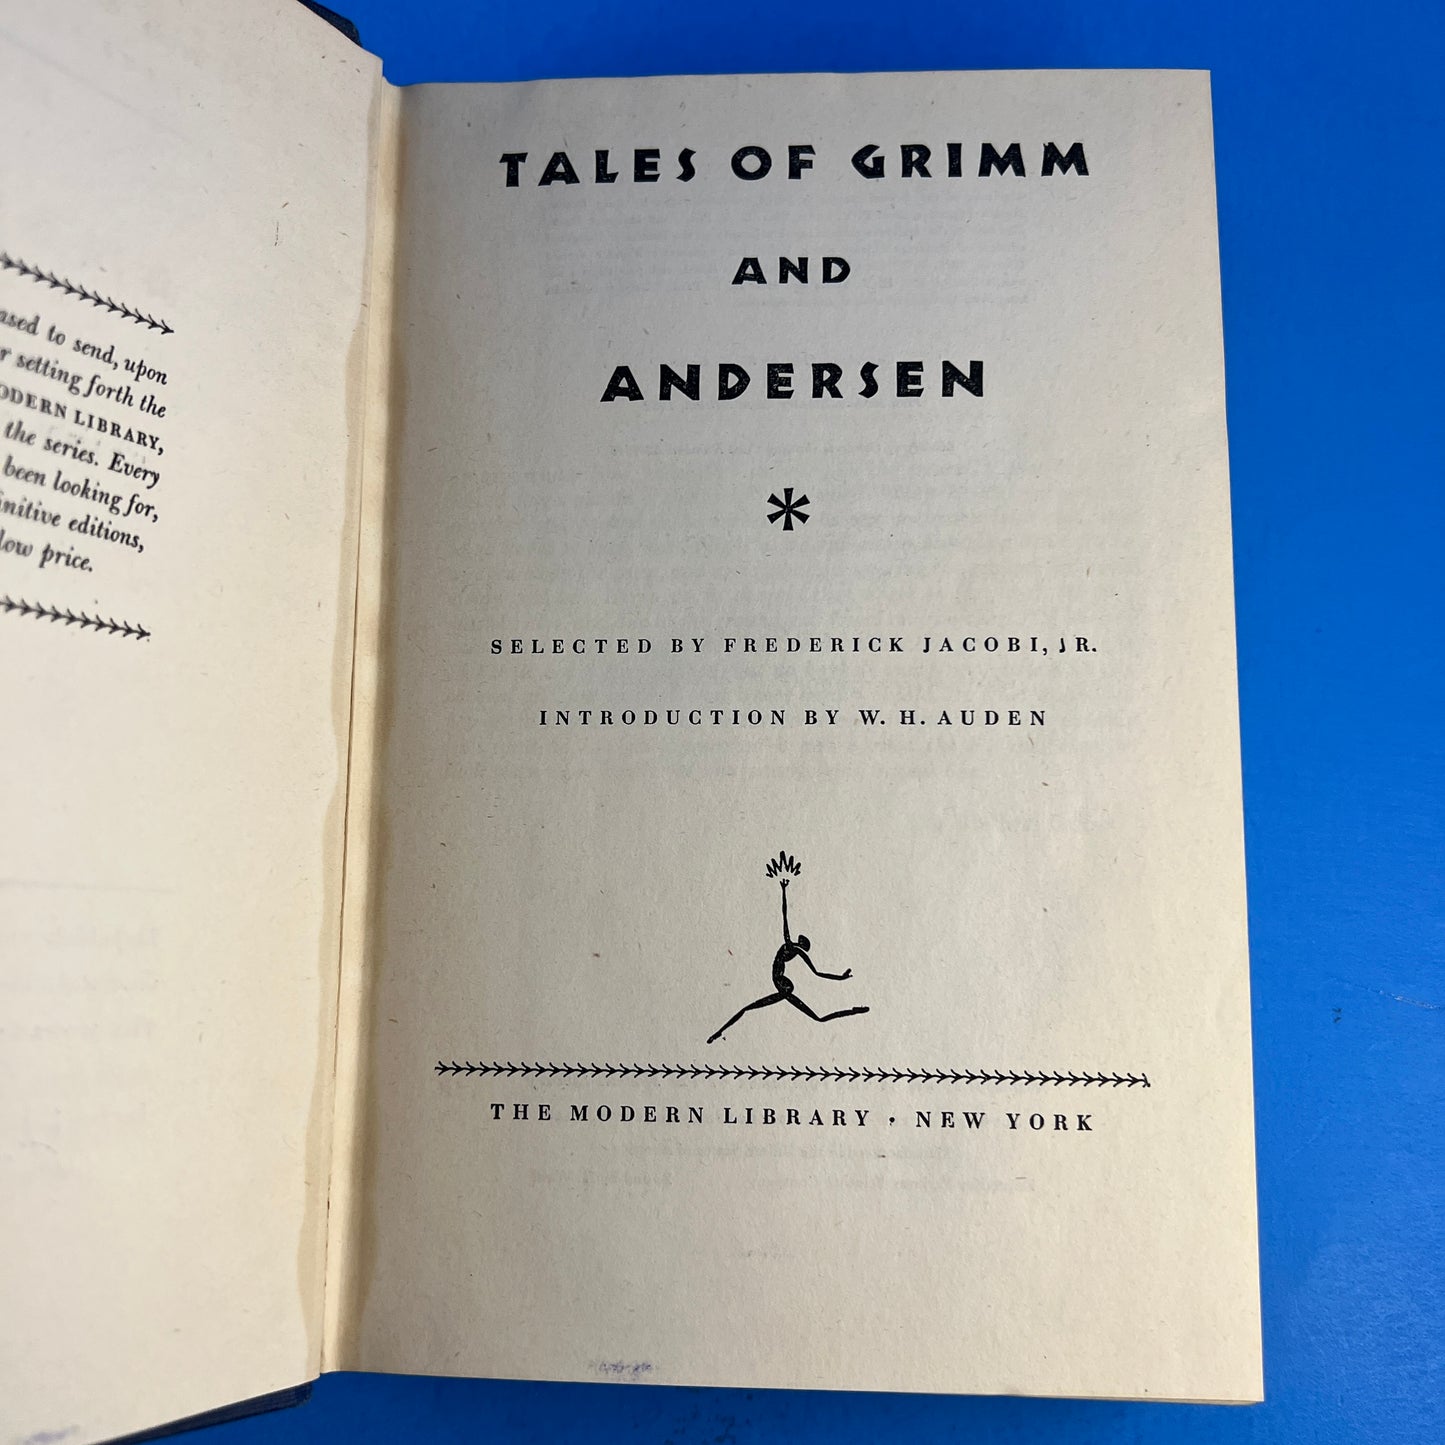 Tales of Grimm and Andersen